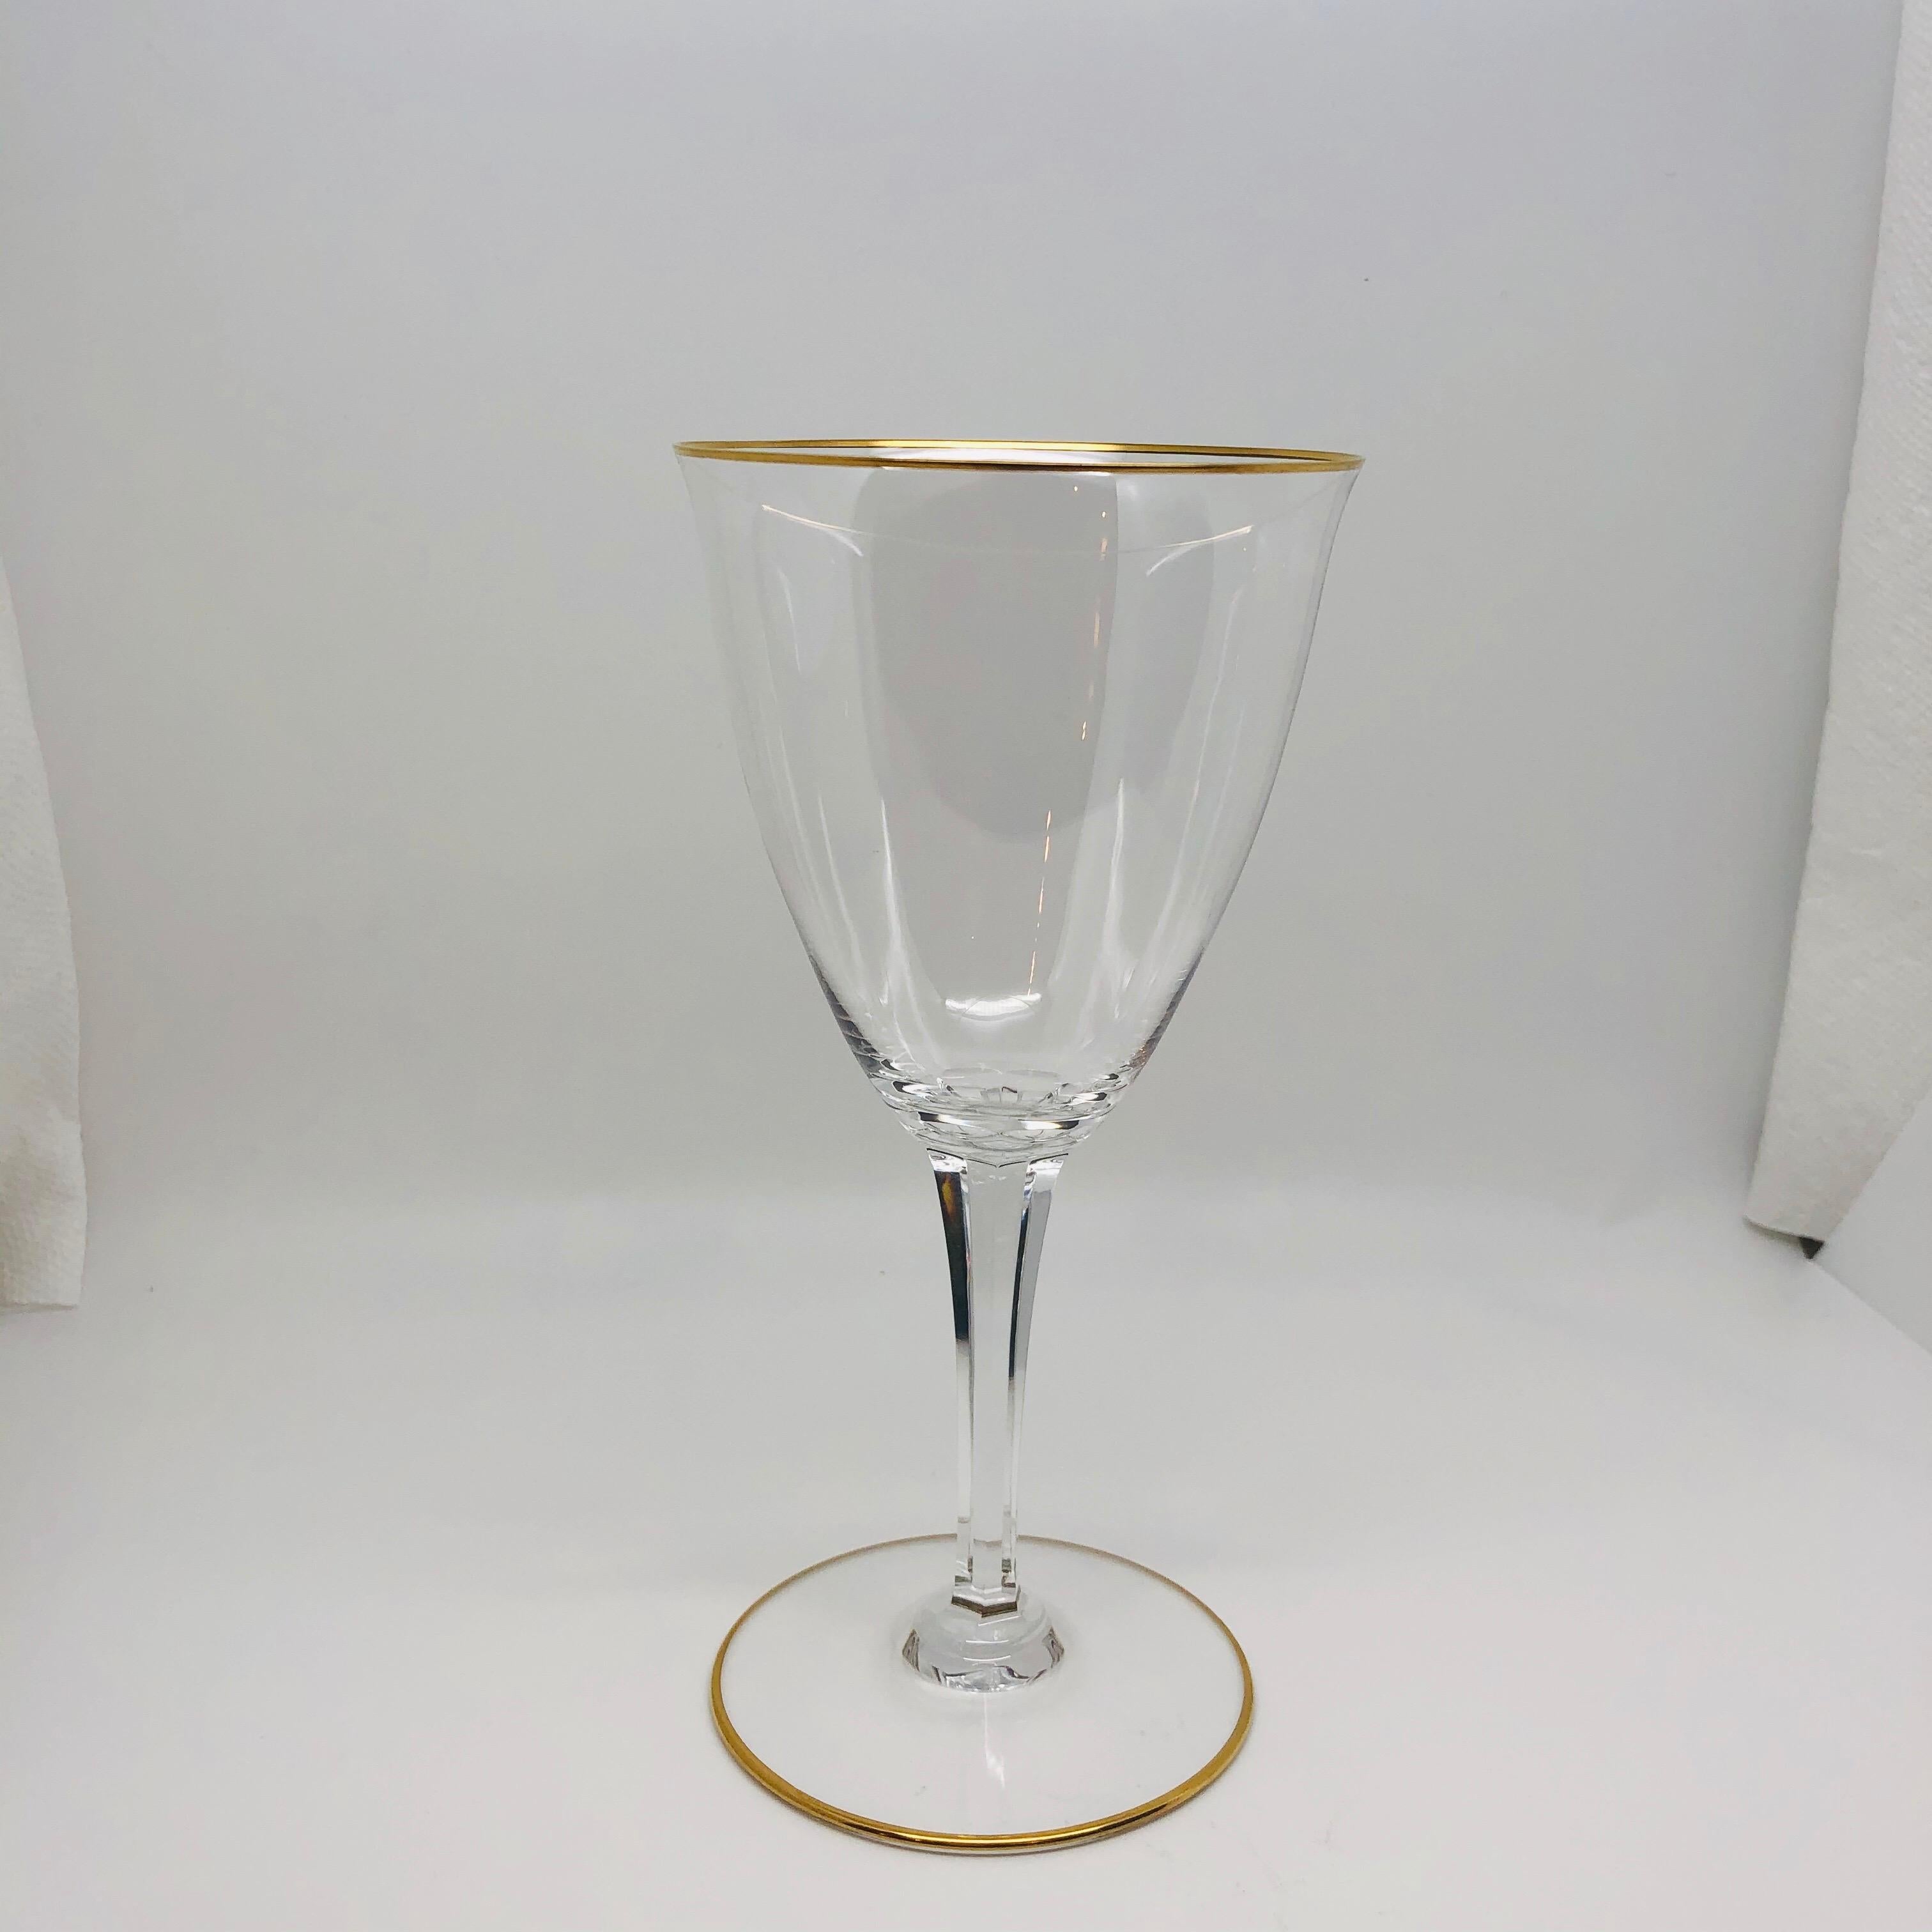 French Set of Twelve Signed Baccarat Goblets with Gold Trimmed Tops and Bottoms